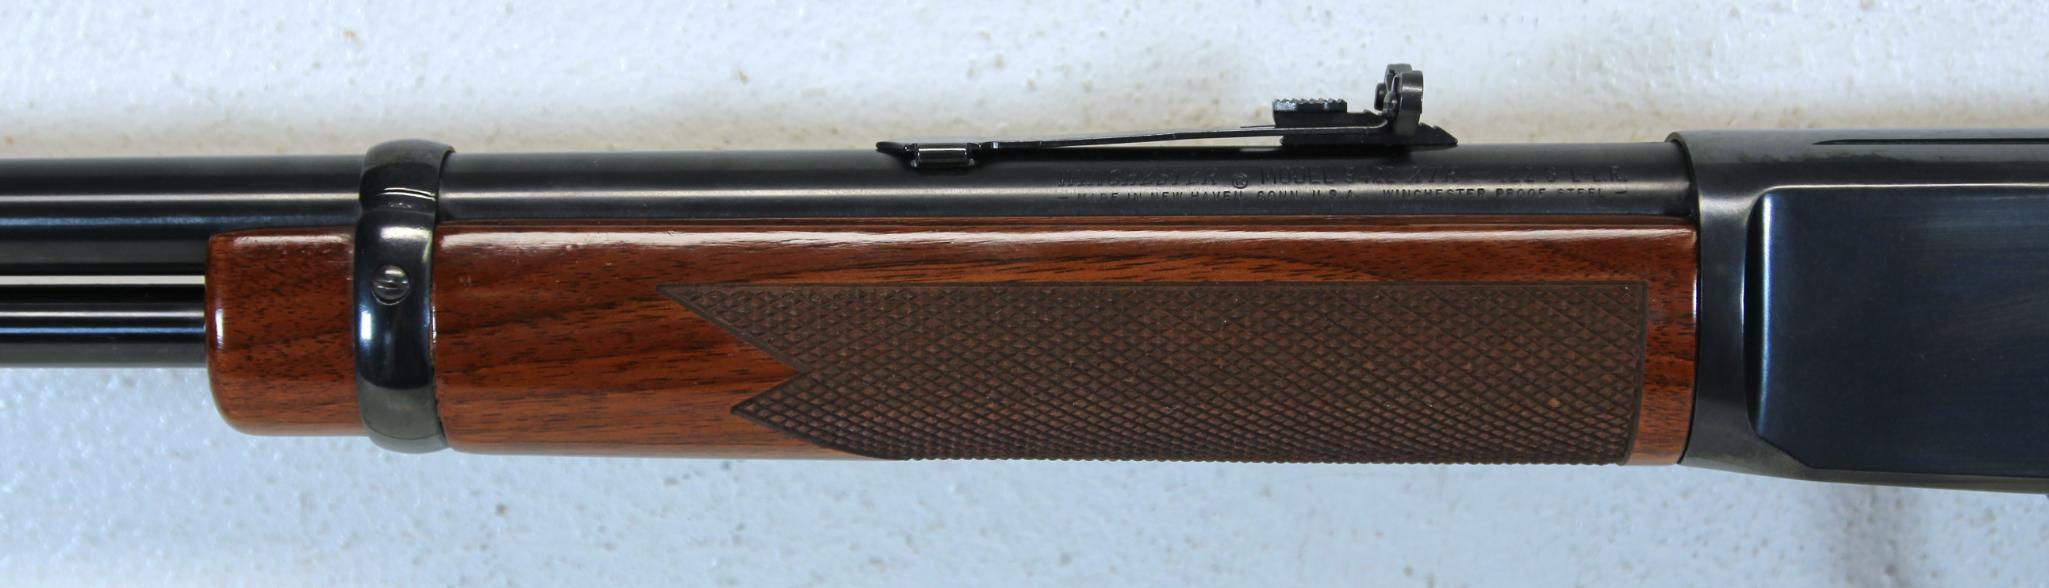 Winchester Model 9422 XTR .22 S,L,LR Lever Action Rifle SN#F367544...